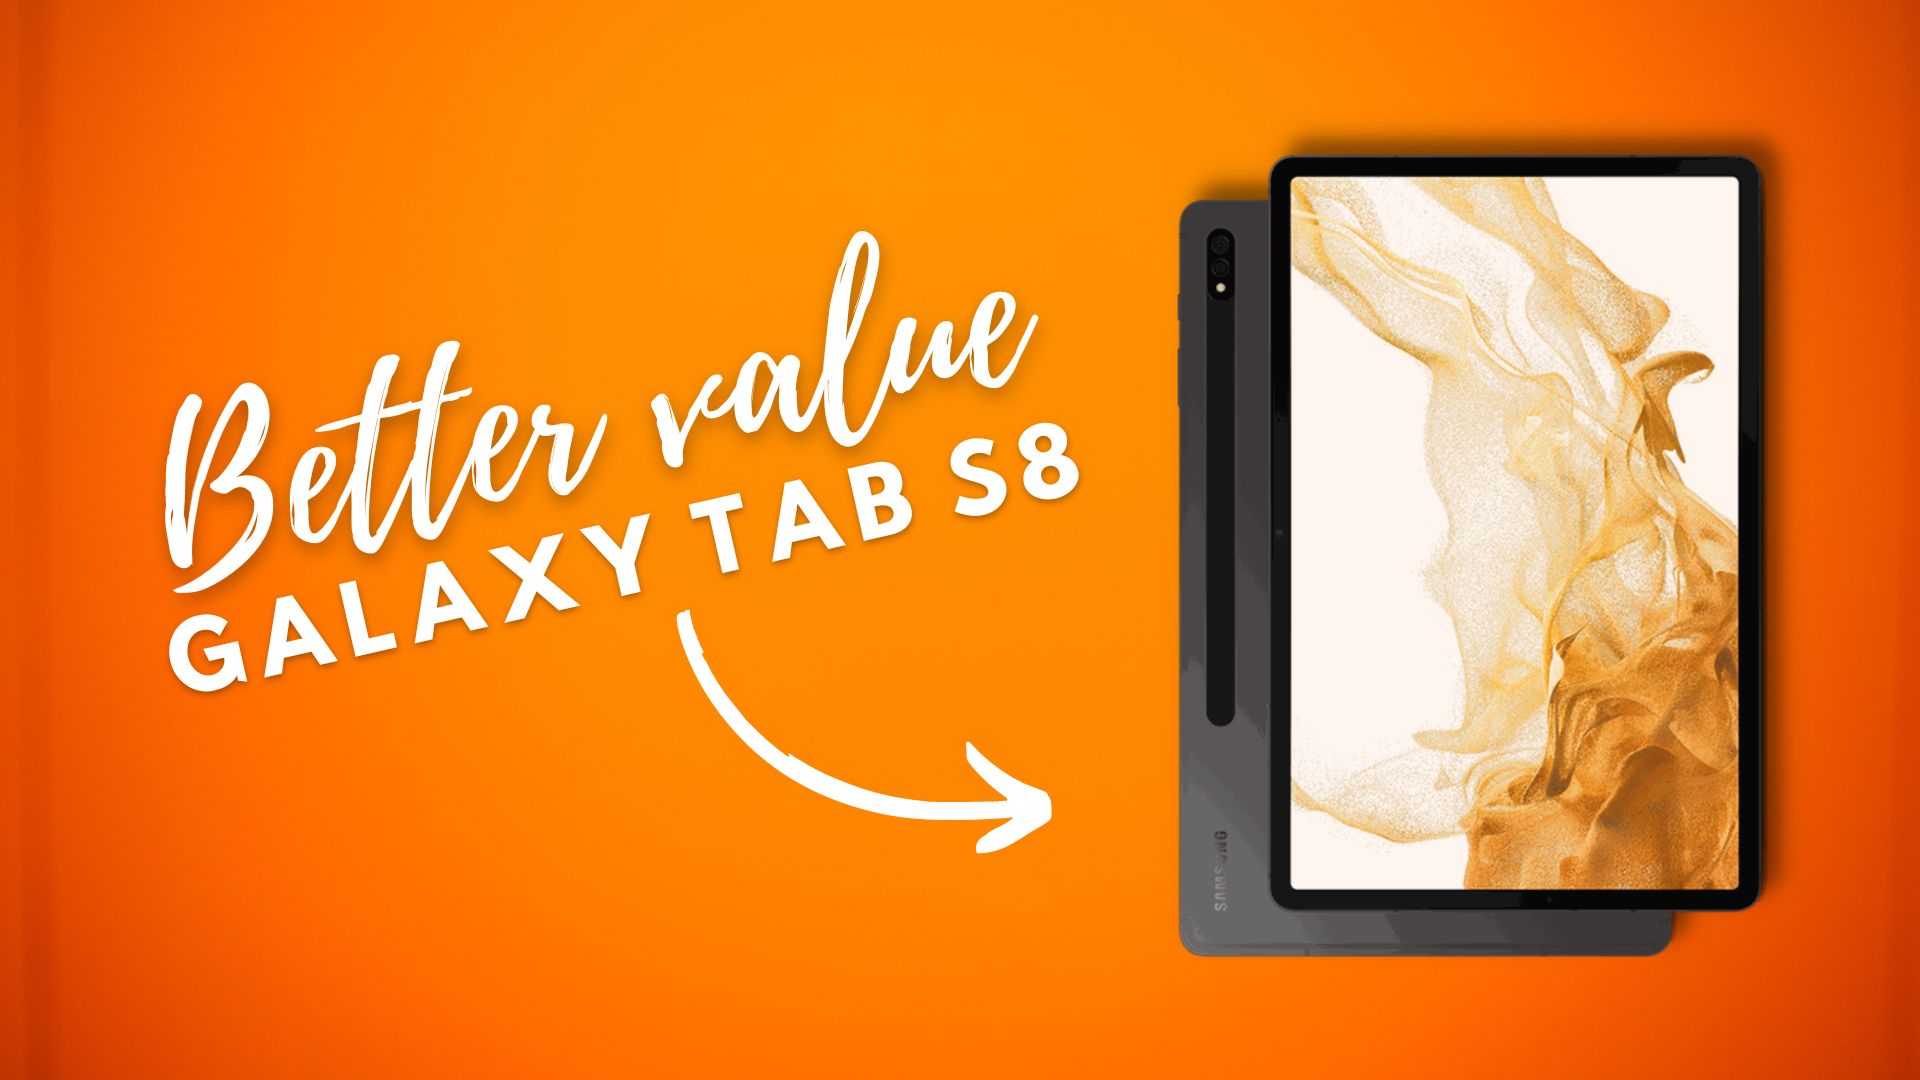 Galaxy Tab S8 Better Value For Money